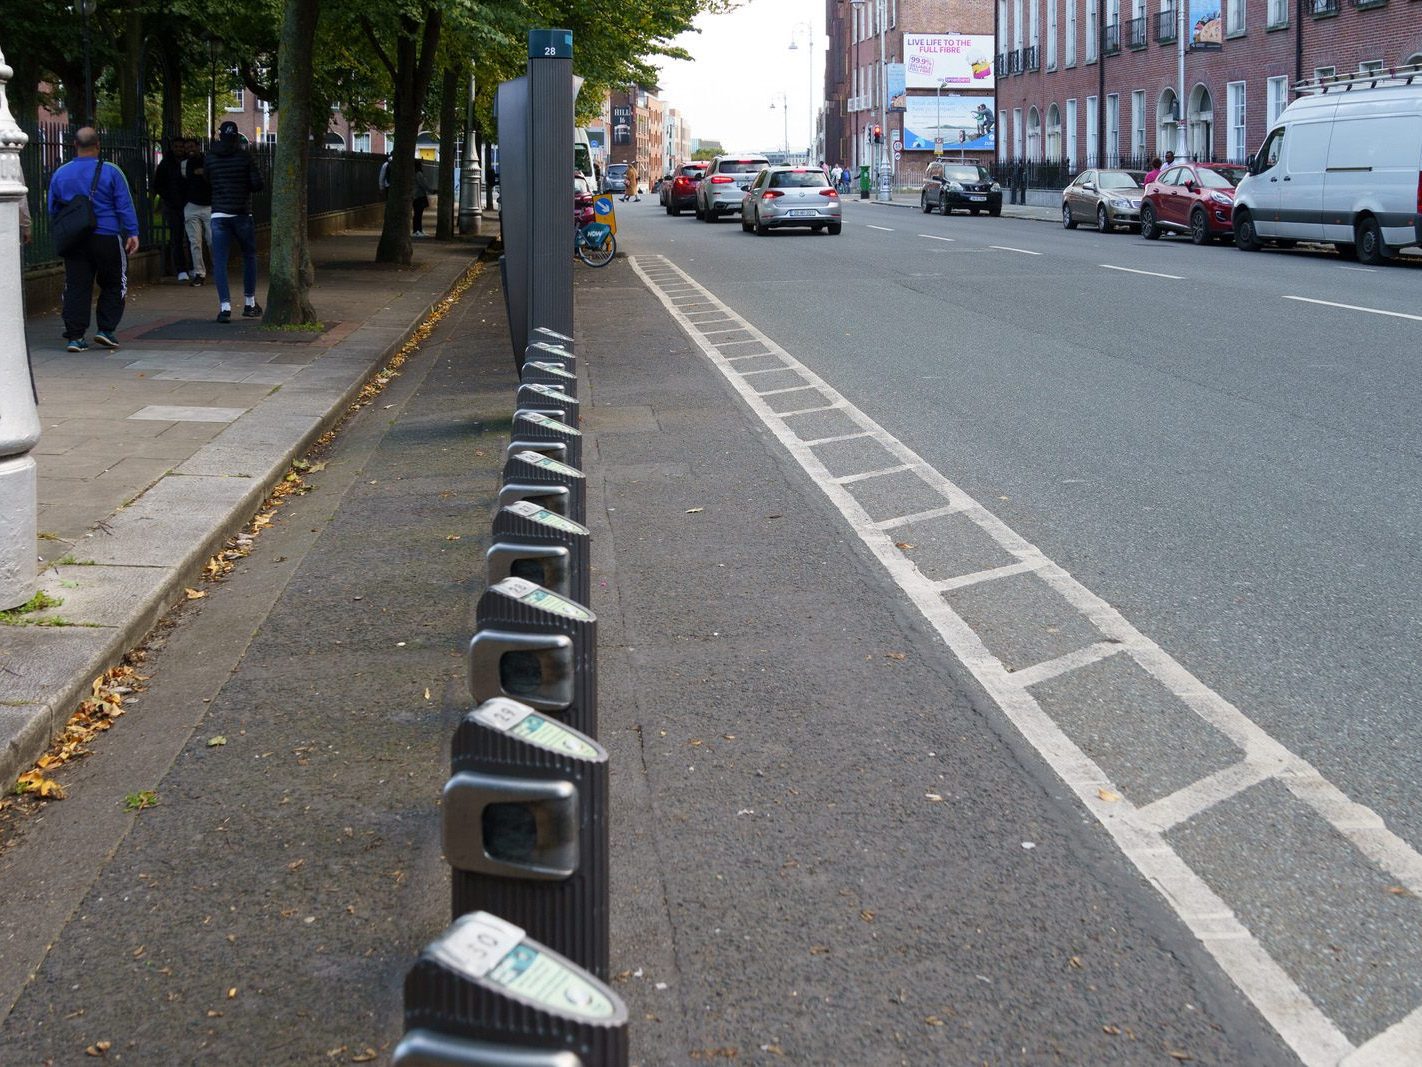 DUBLINBIKES DOCKING STATION 28 AT MOUNTJOY SQUARE [ALL BIKES HAVE BEEN CHECKED OUT] 001